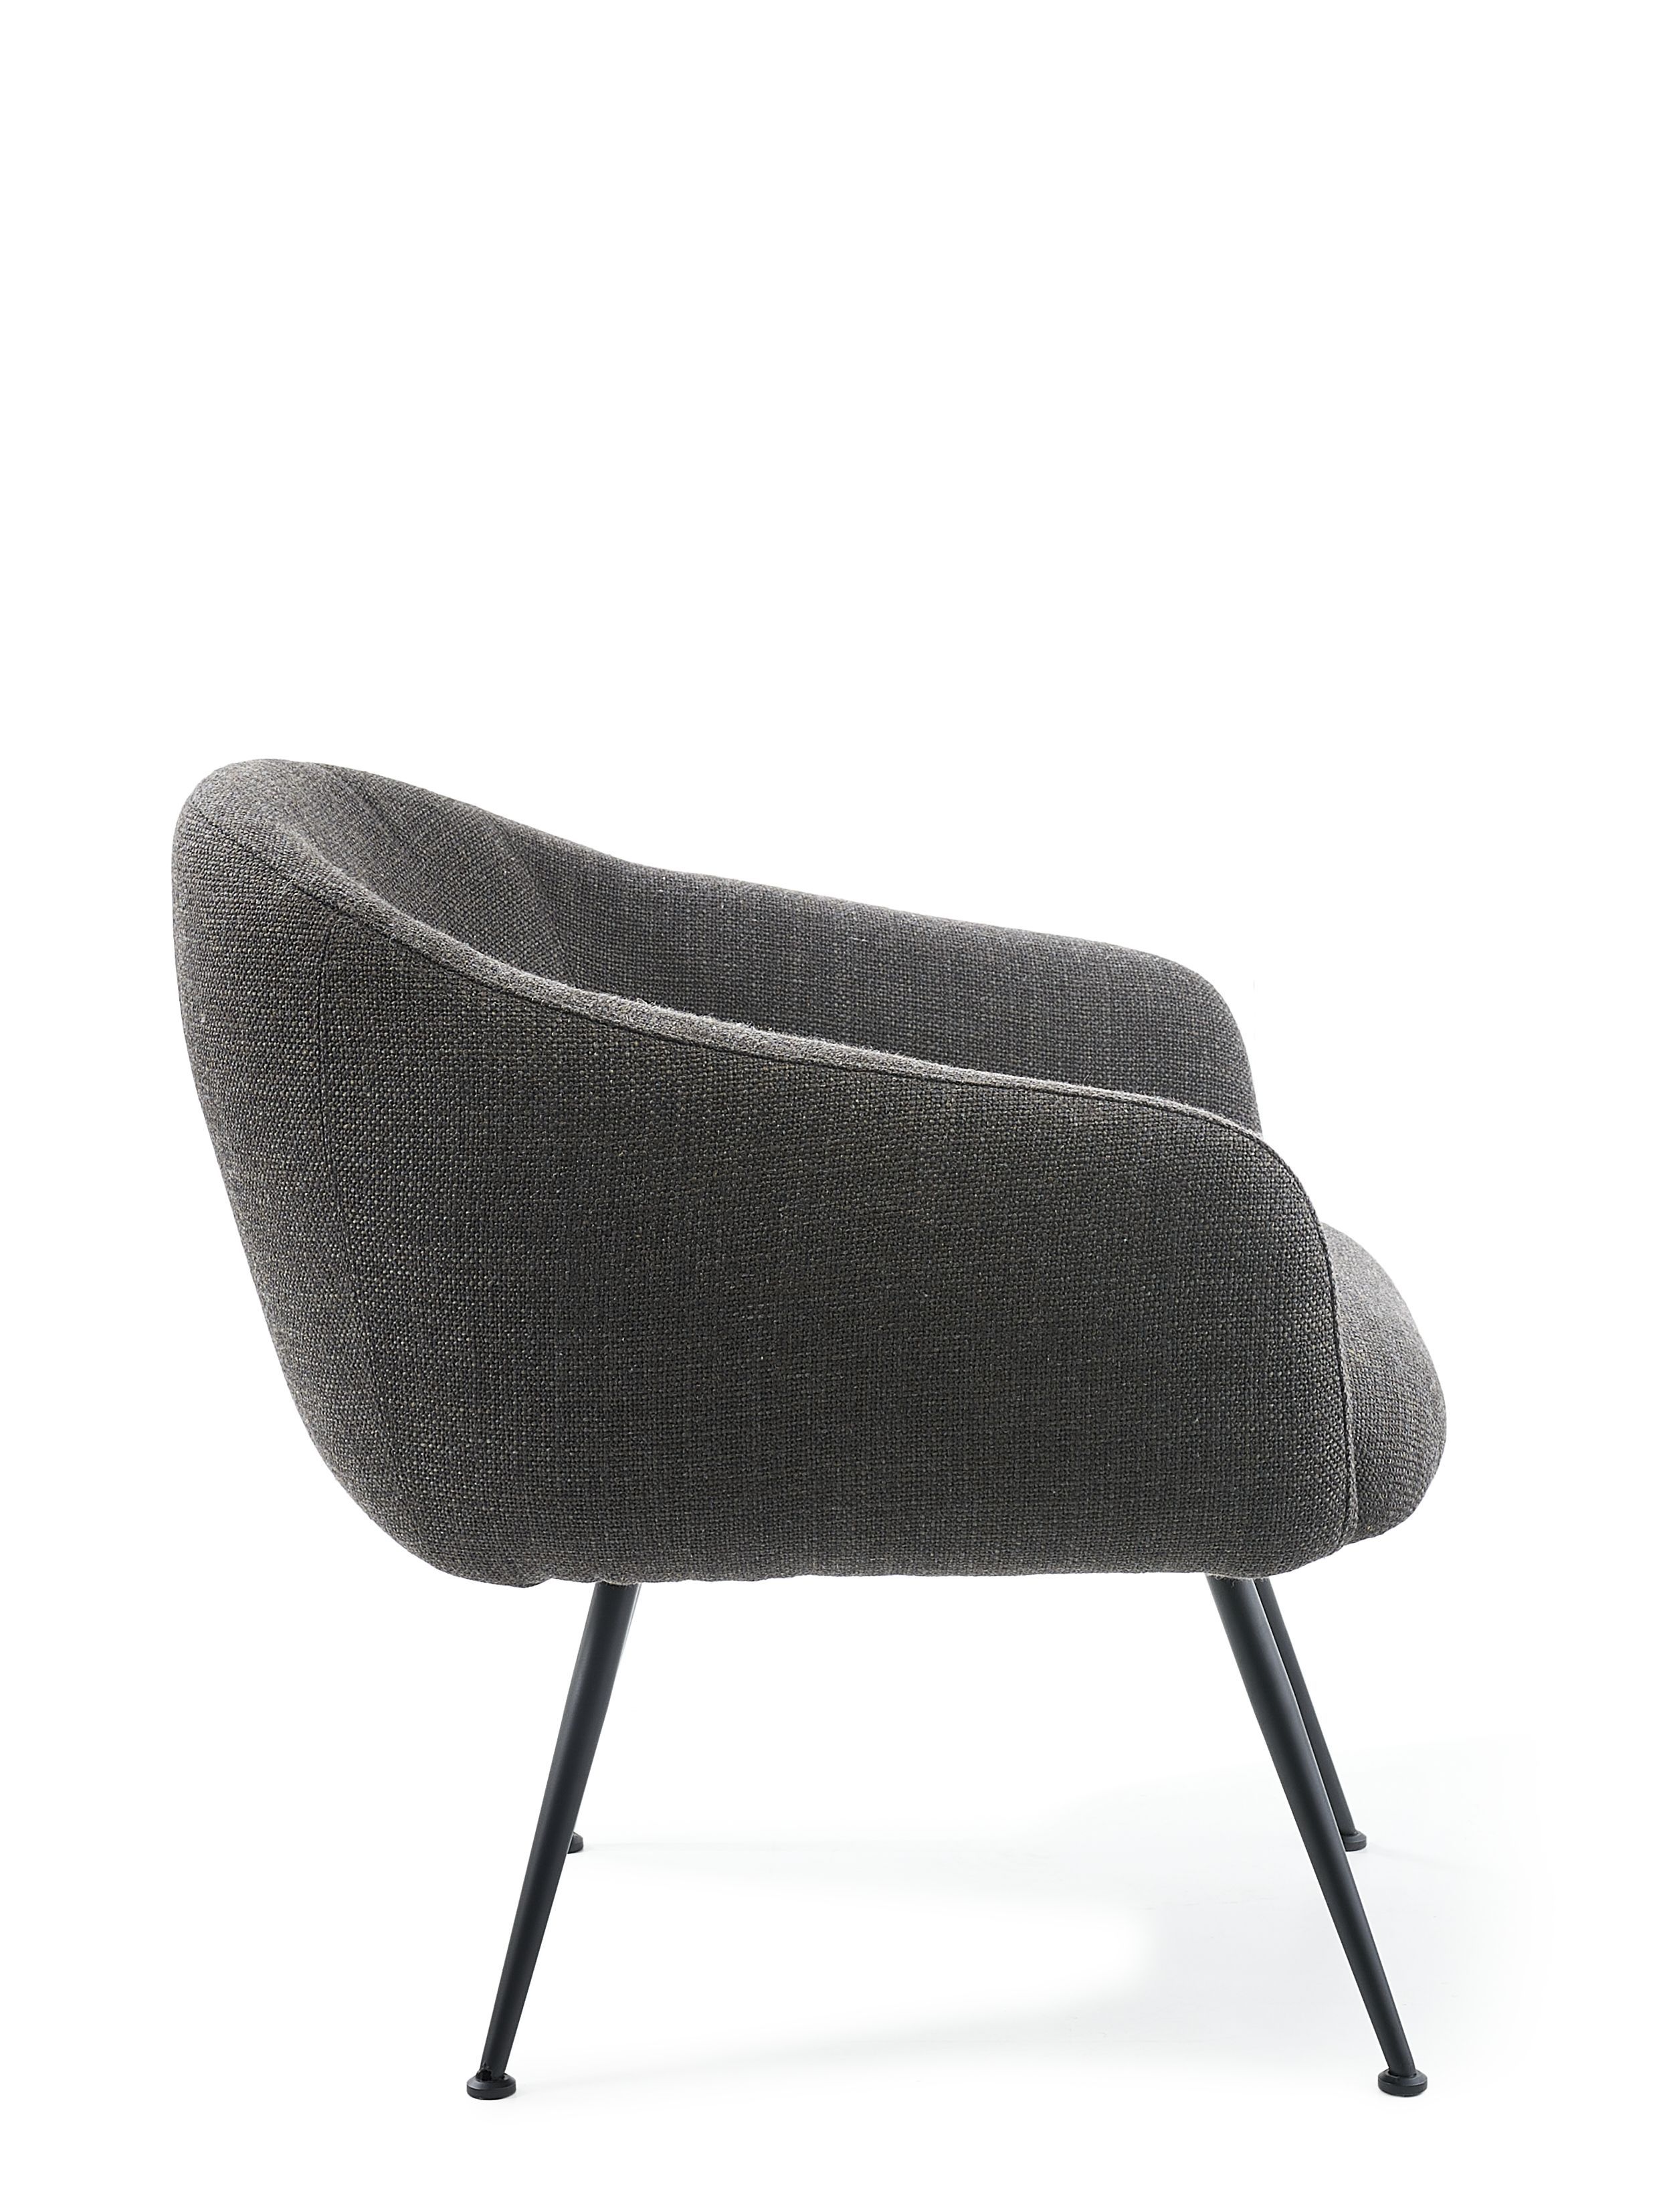 Buddy Chair by Pols Potten